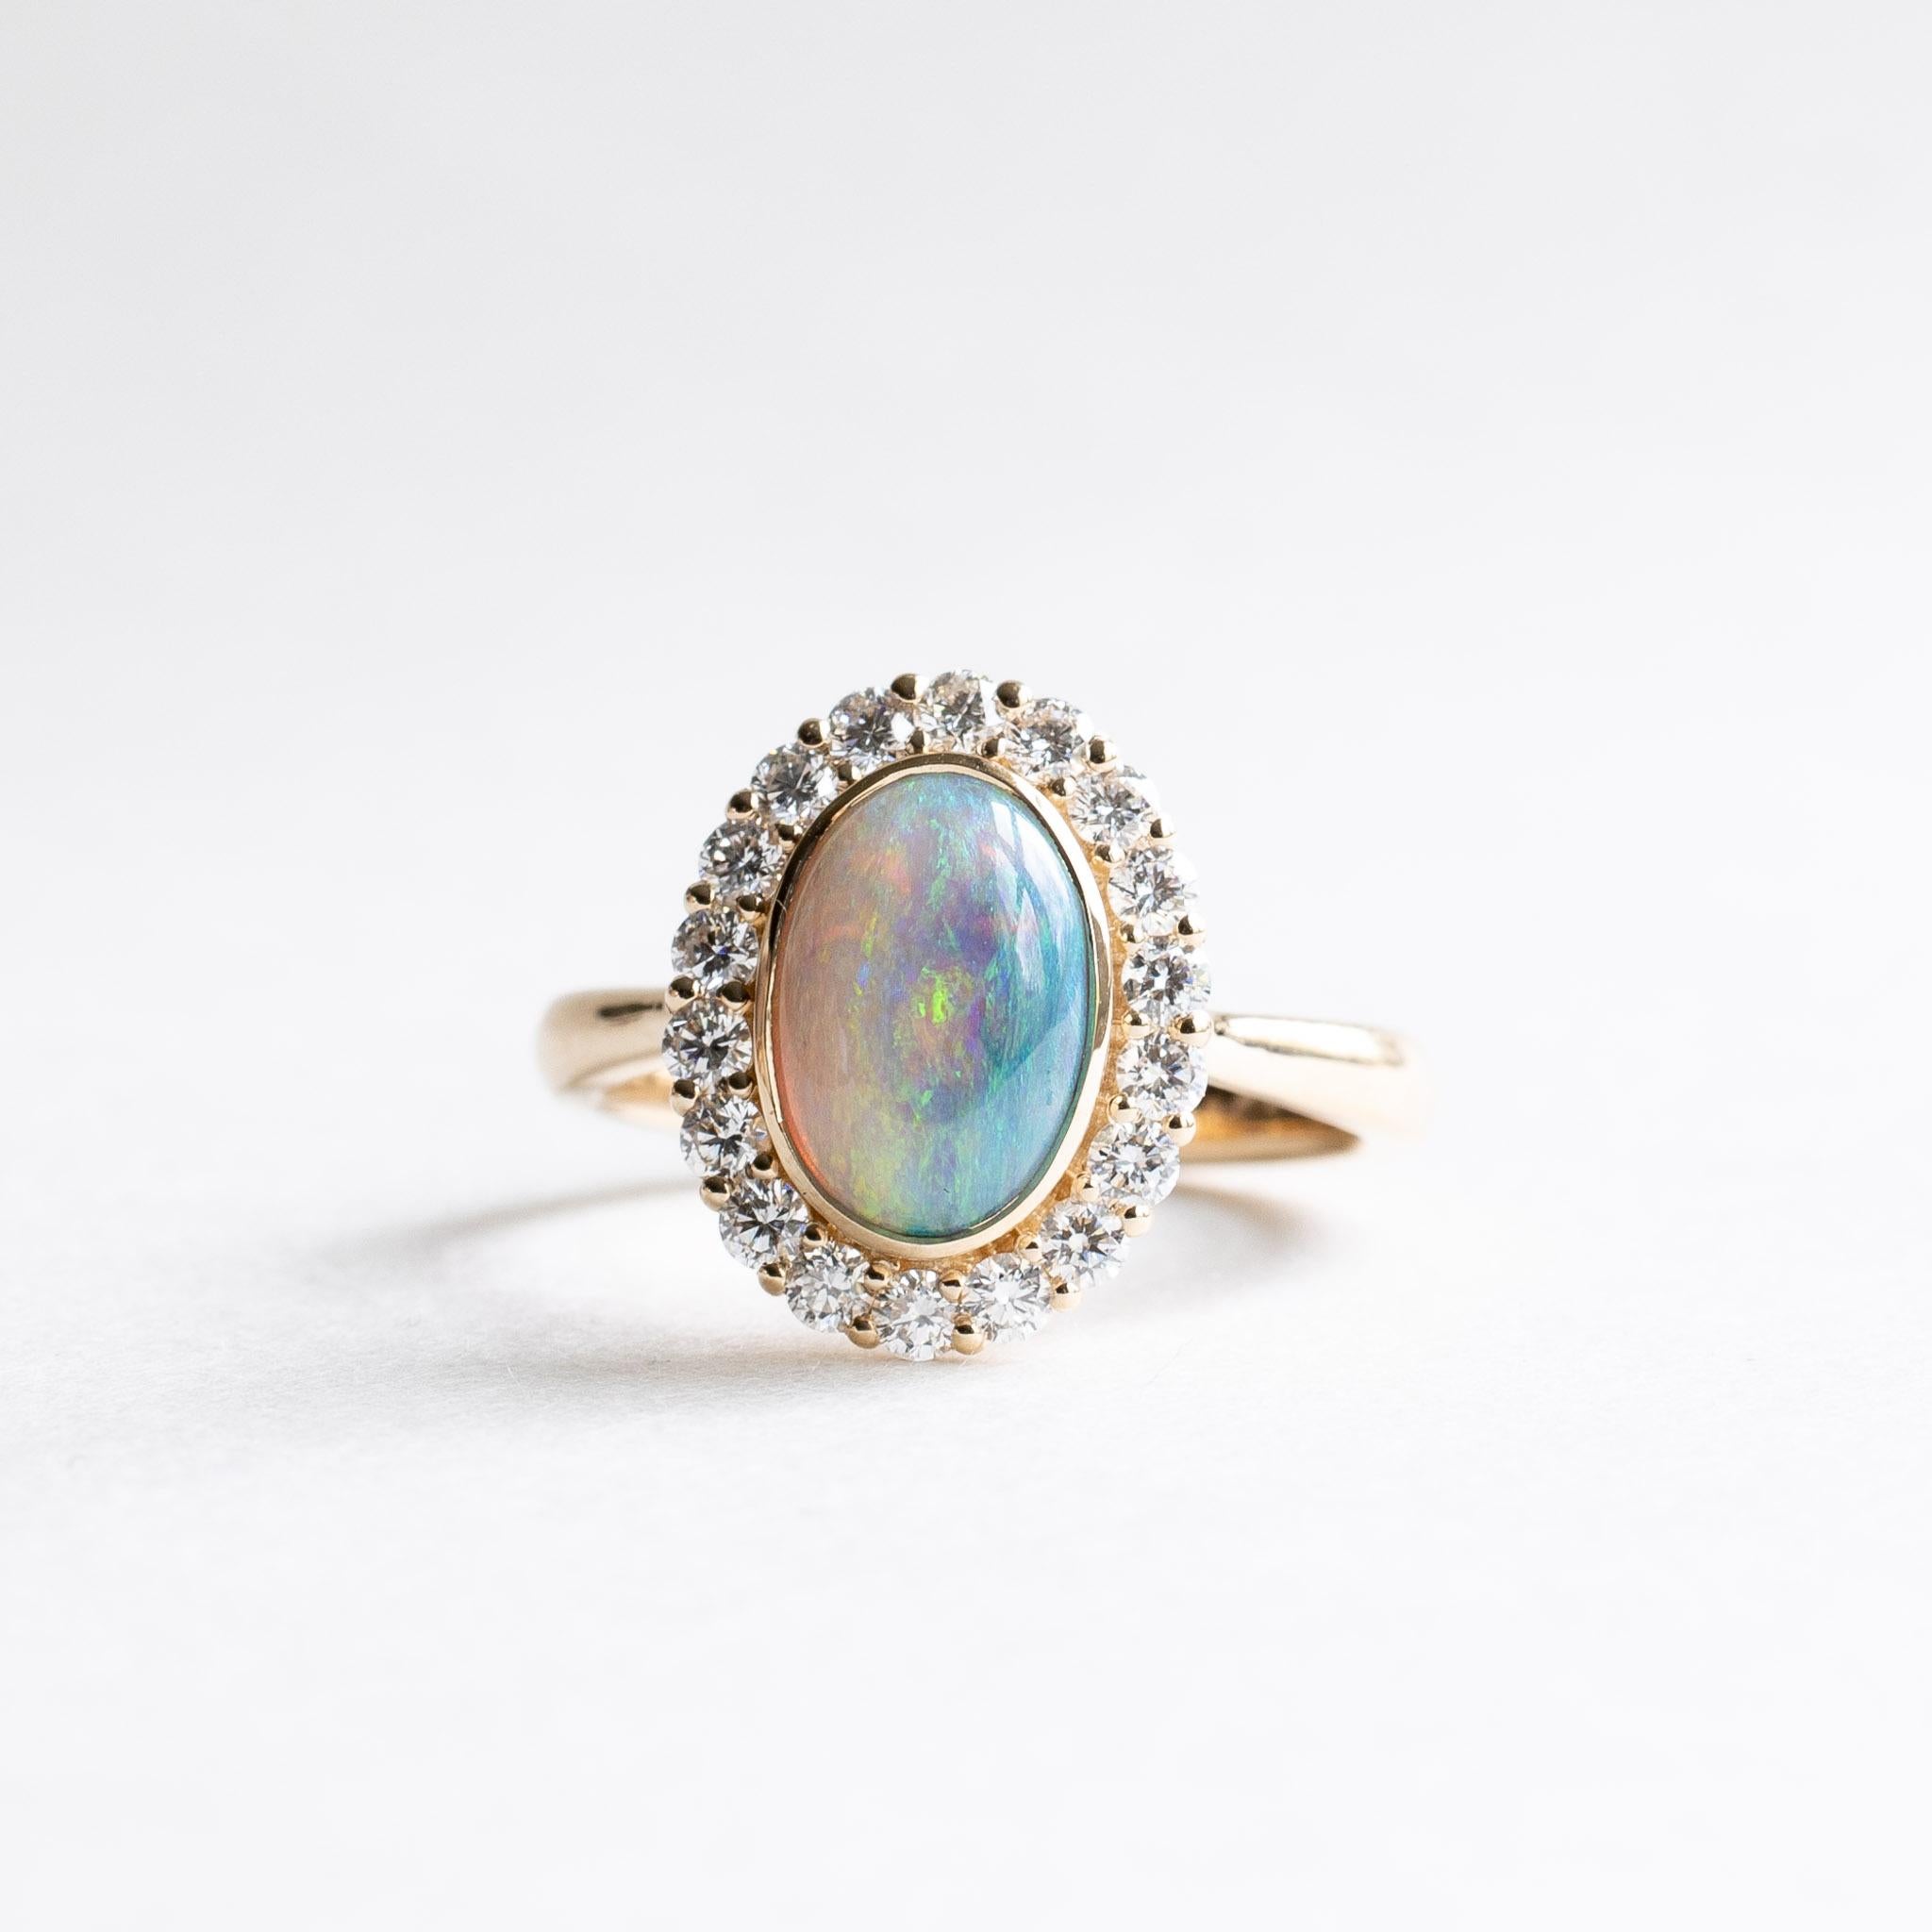 18k 1.66 Carat Australian Opal Halo Ring, Cocktail Ring For Sale 1